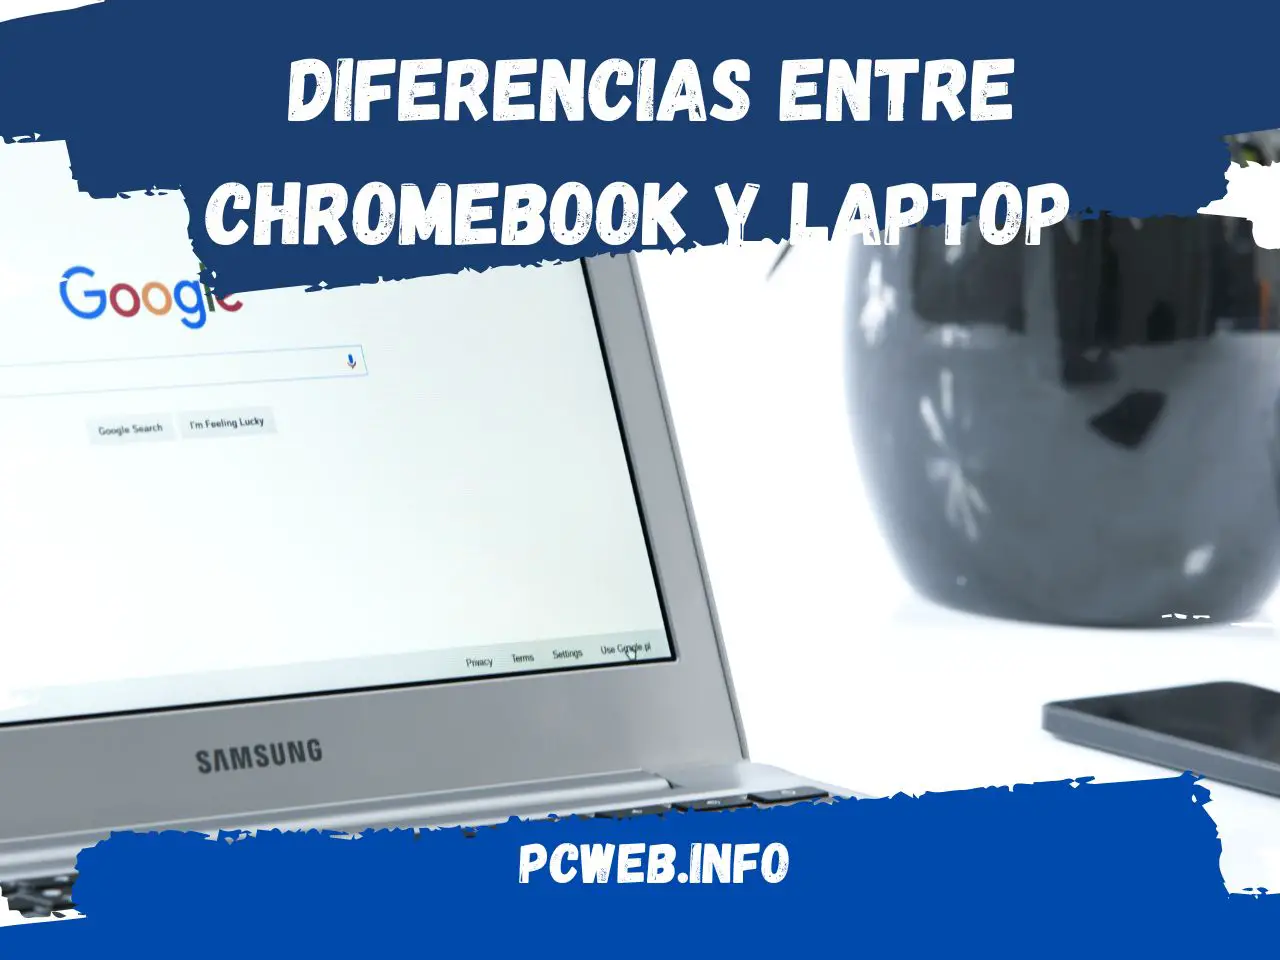 Differences between Chromebook and Laptop